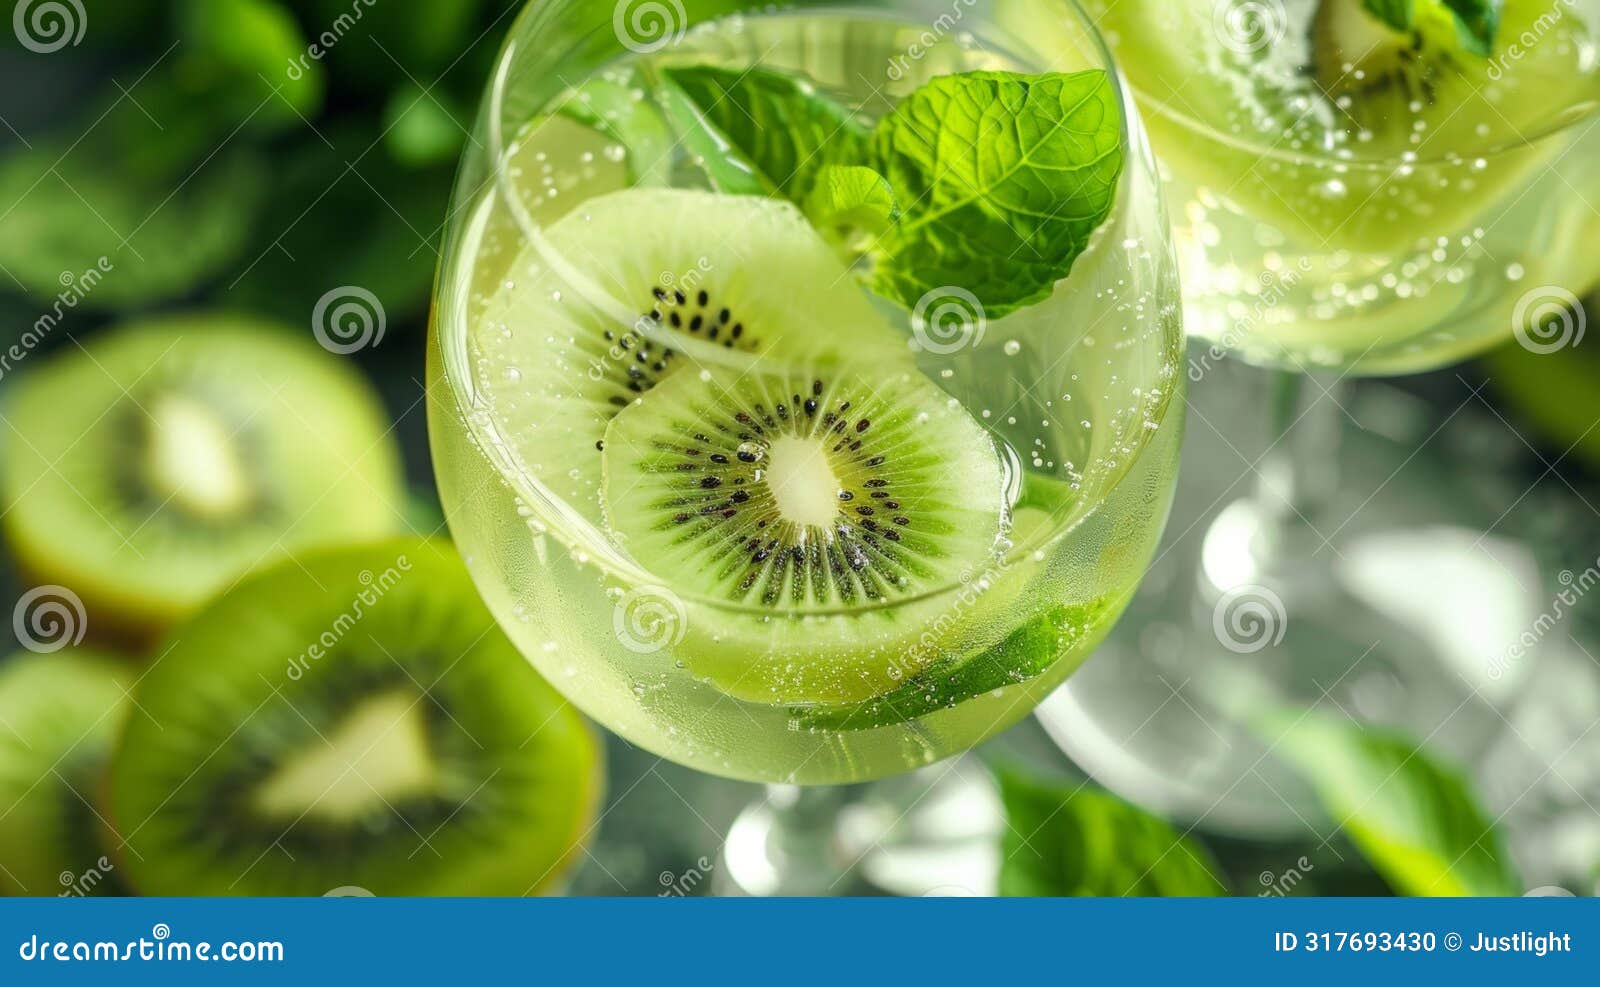 a blend of kiwi and melon complementing a smooth pinot grigio for a tropical twist on a traditional pairing